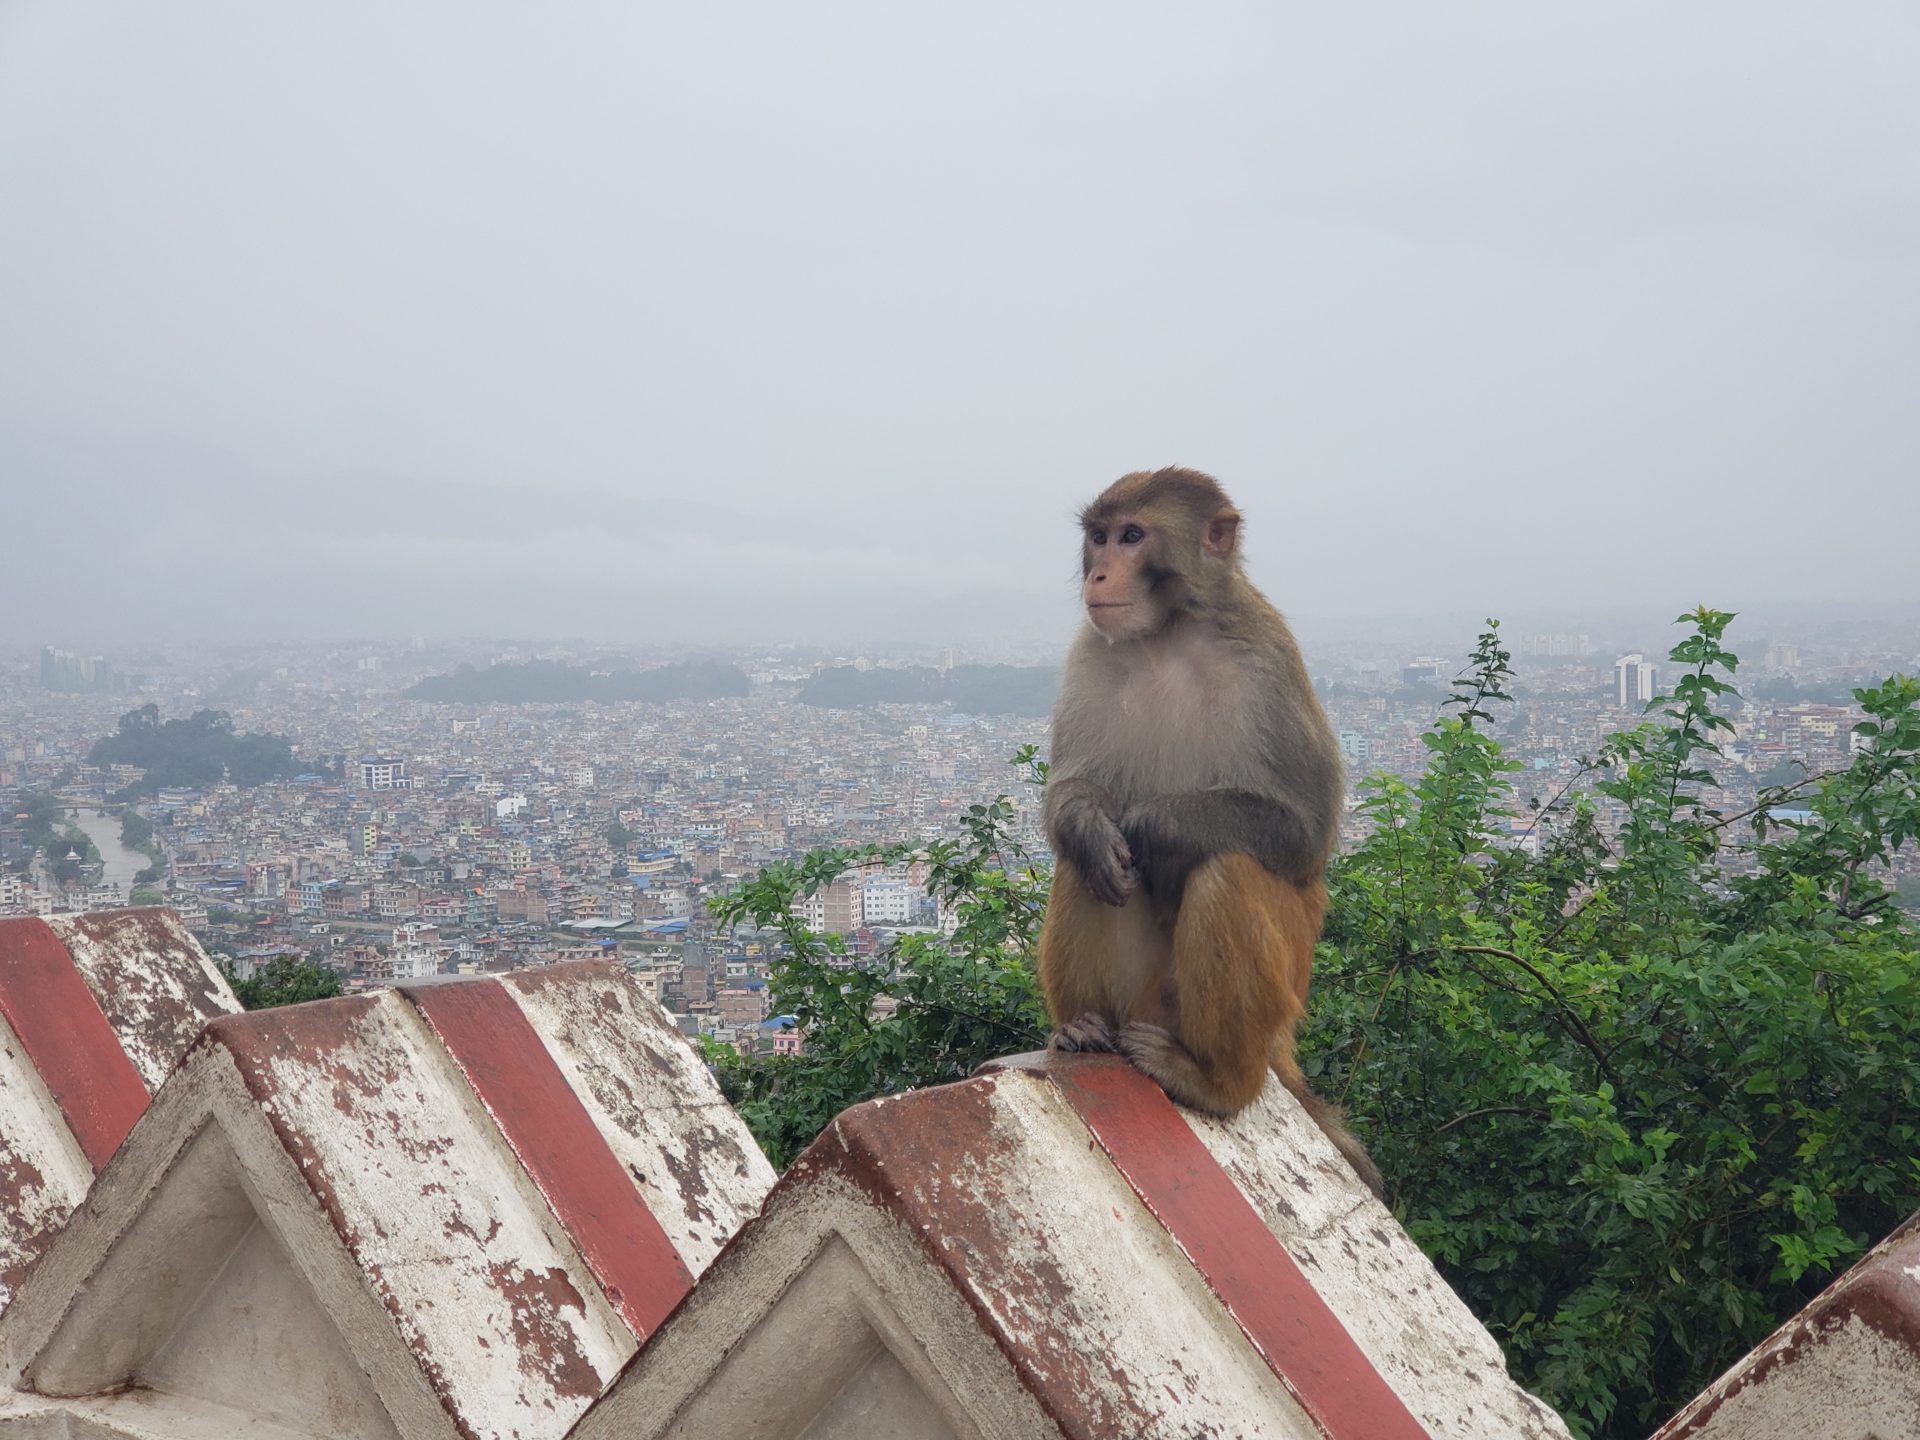 a monkey sitting on a roof